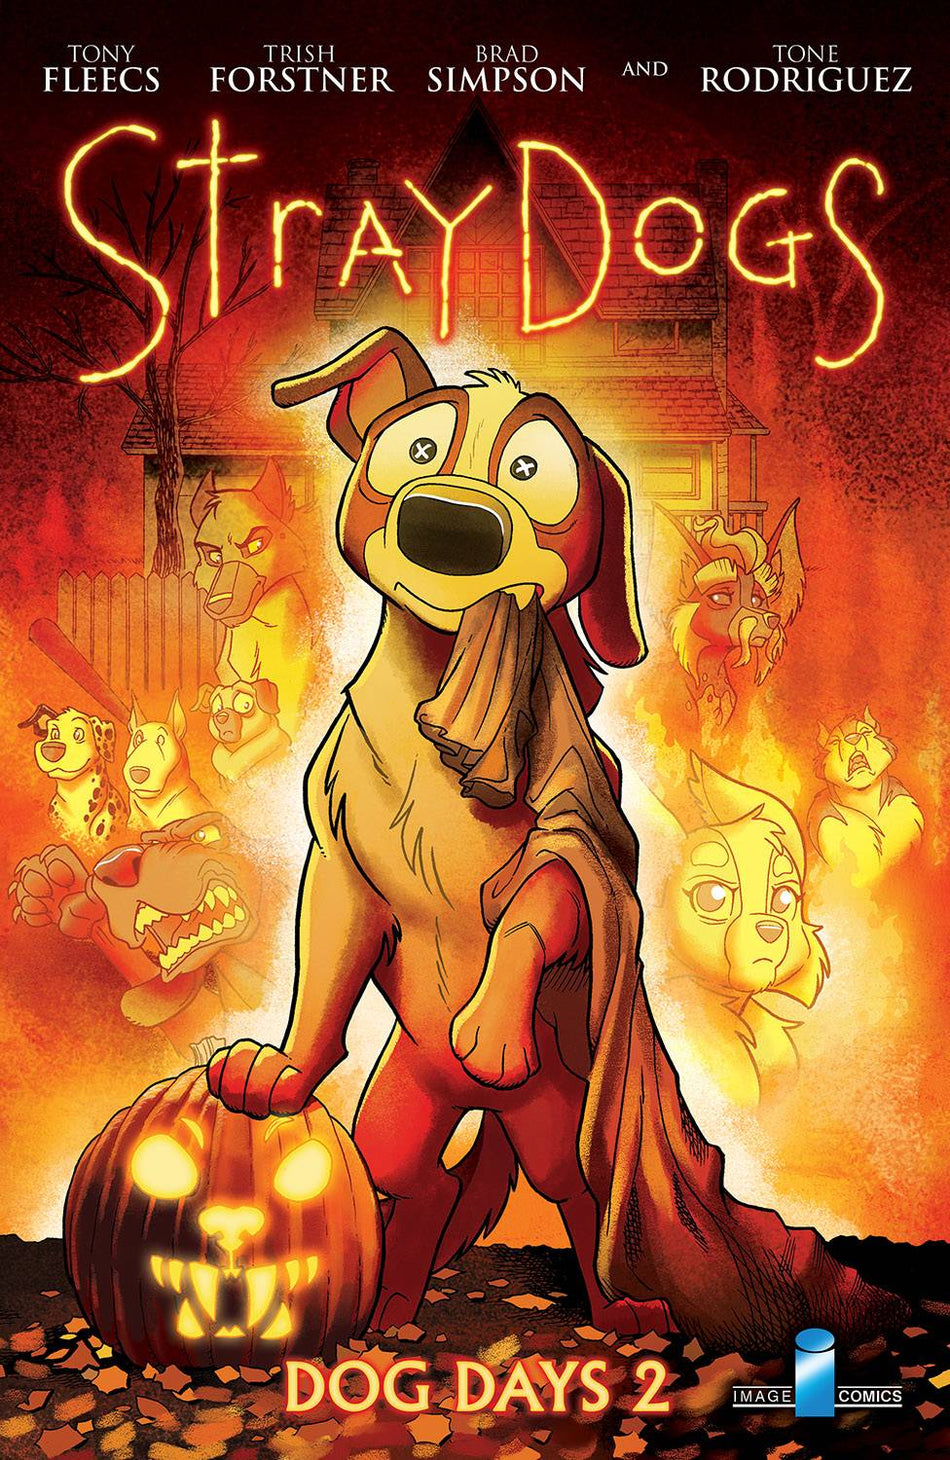 Photo of Stray Dogs Dog Days Issue 2 (of 2) CVR B Horror Movie Var comic sold by Stronghold Collectibles